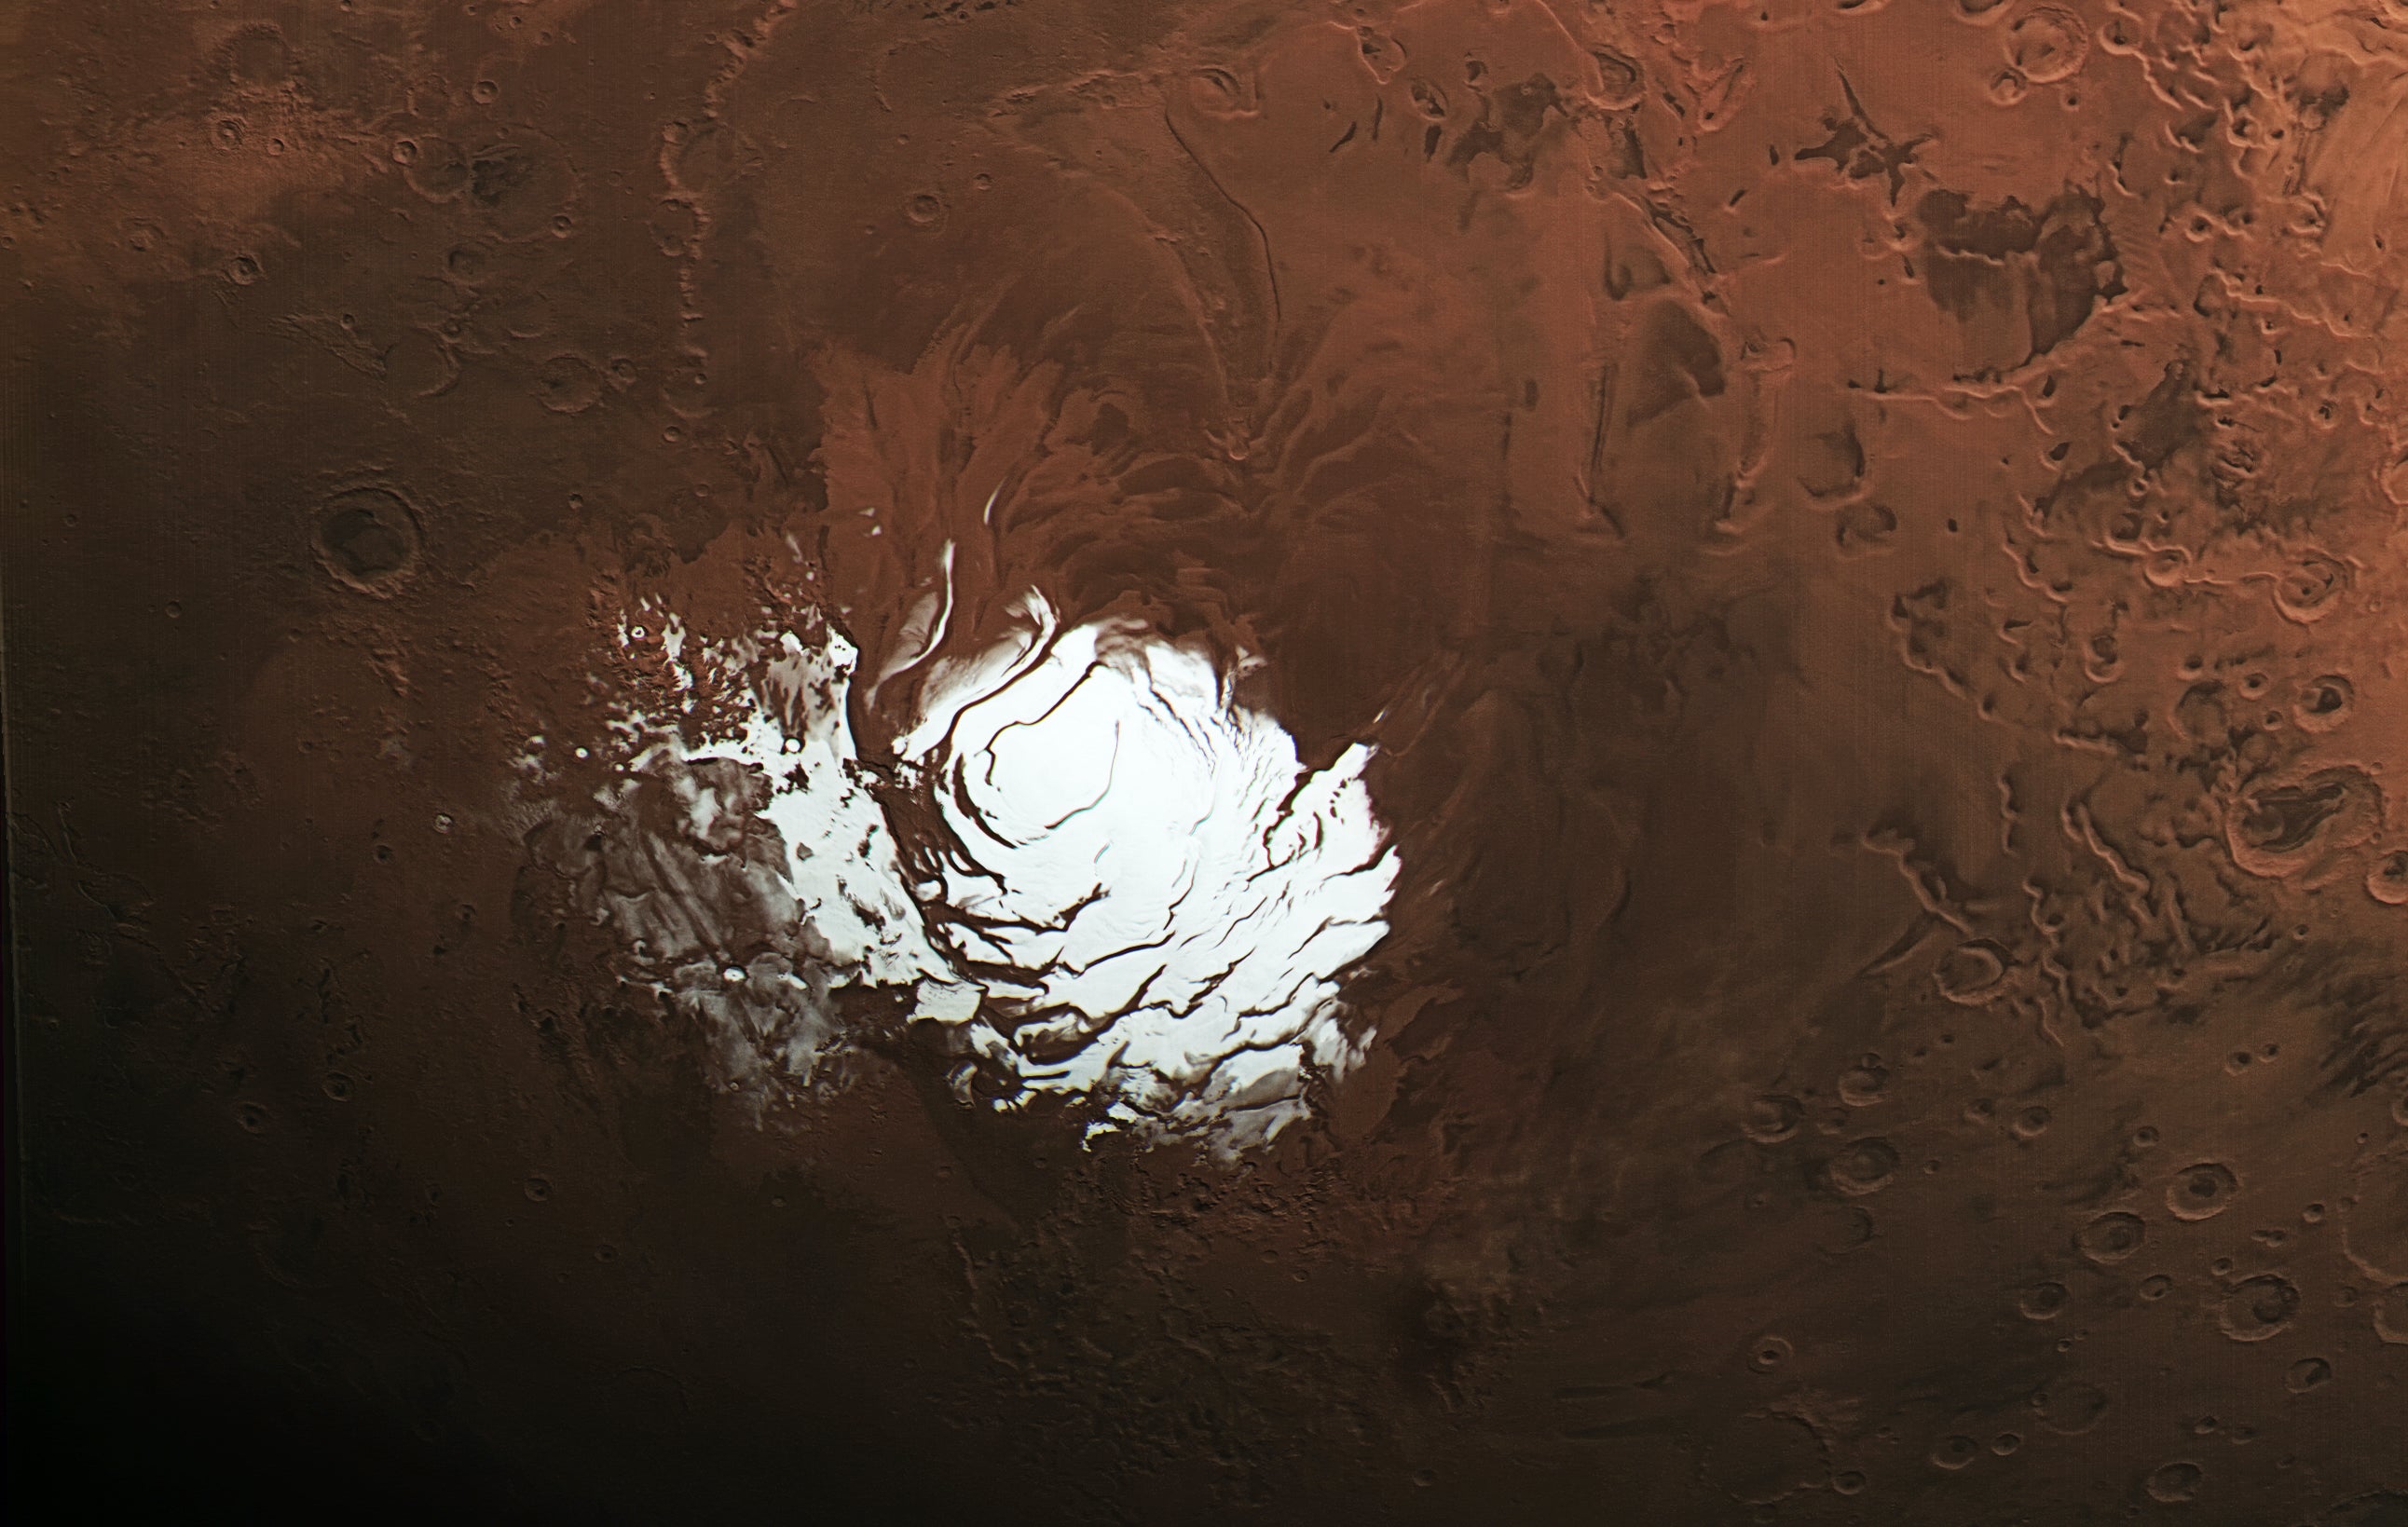 Liquid water spotted on Mars may just be an illusion, a study says (ESA/DLR/FU Berlin)